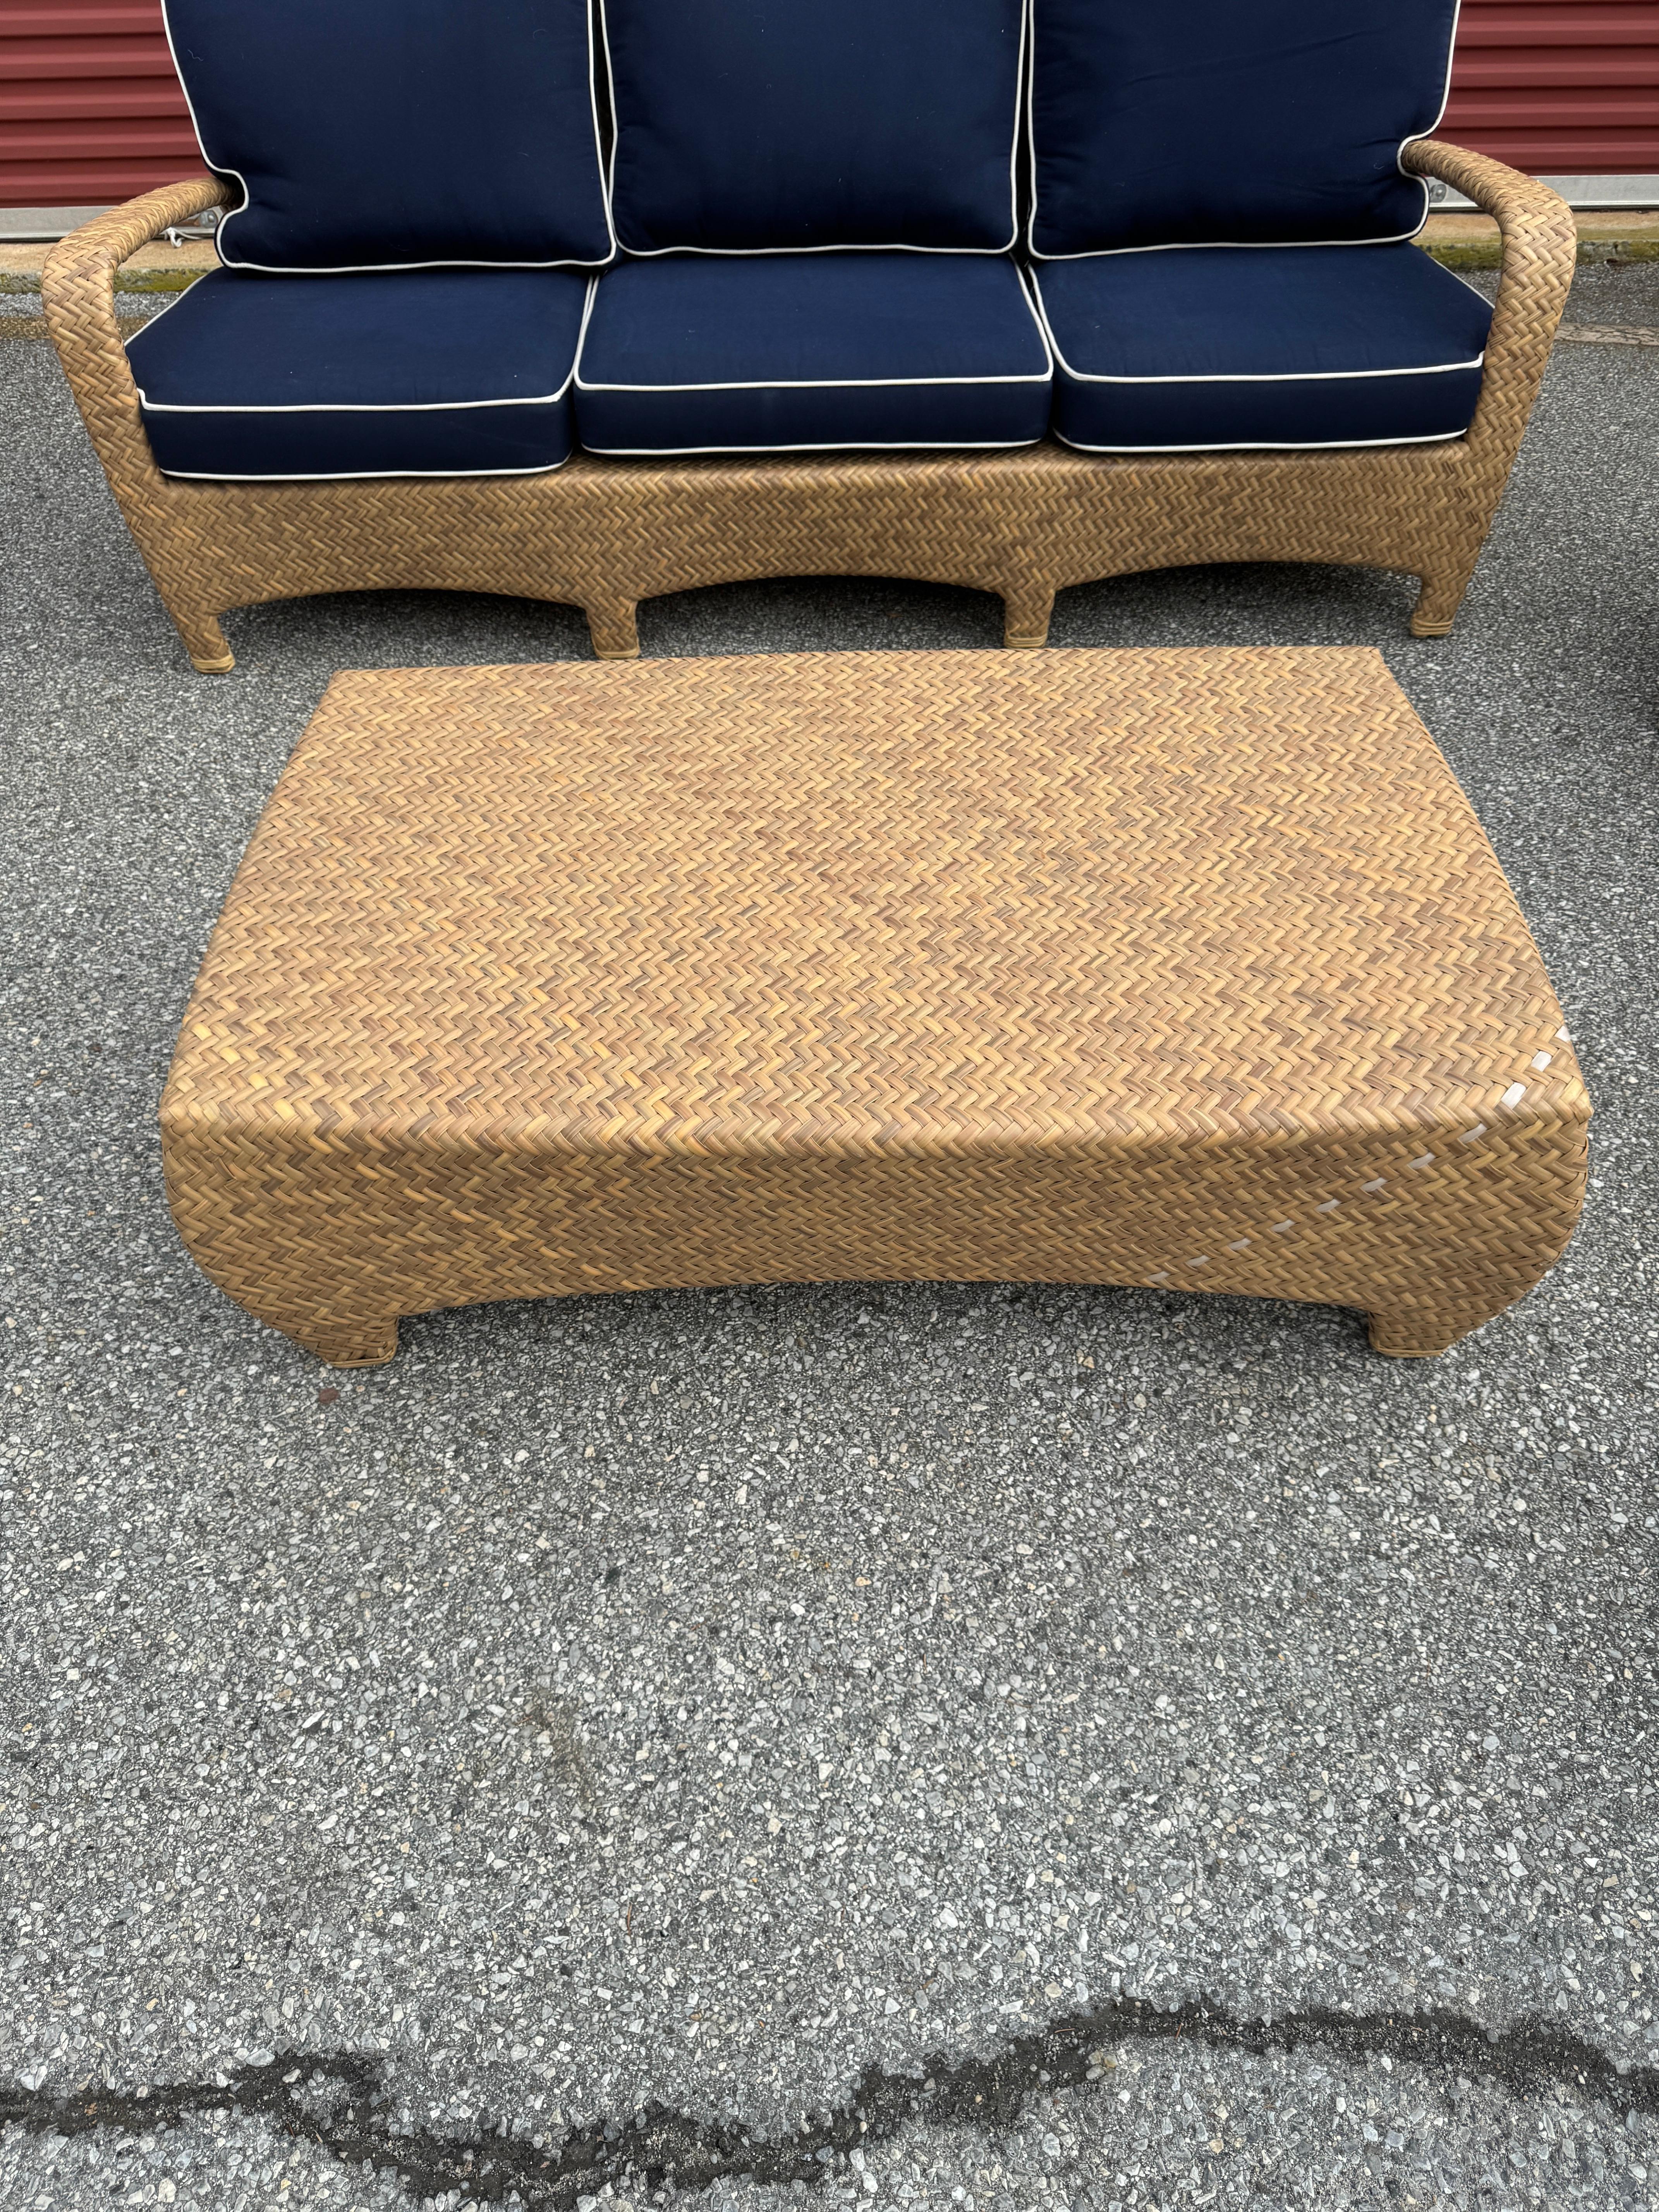 Unknown Late 20th Century Wicker Sculptural Patio Seating & Tables, 8 Pieces For Sale